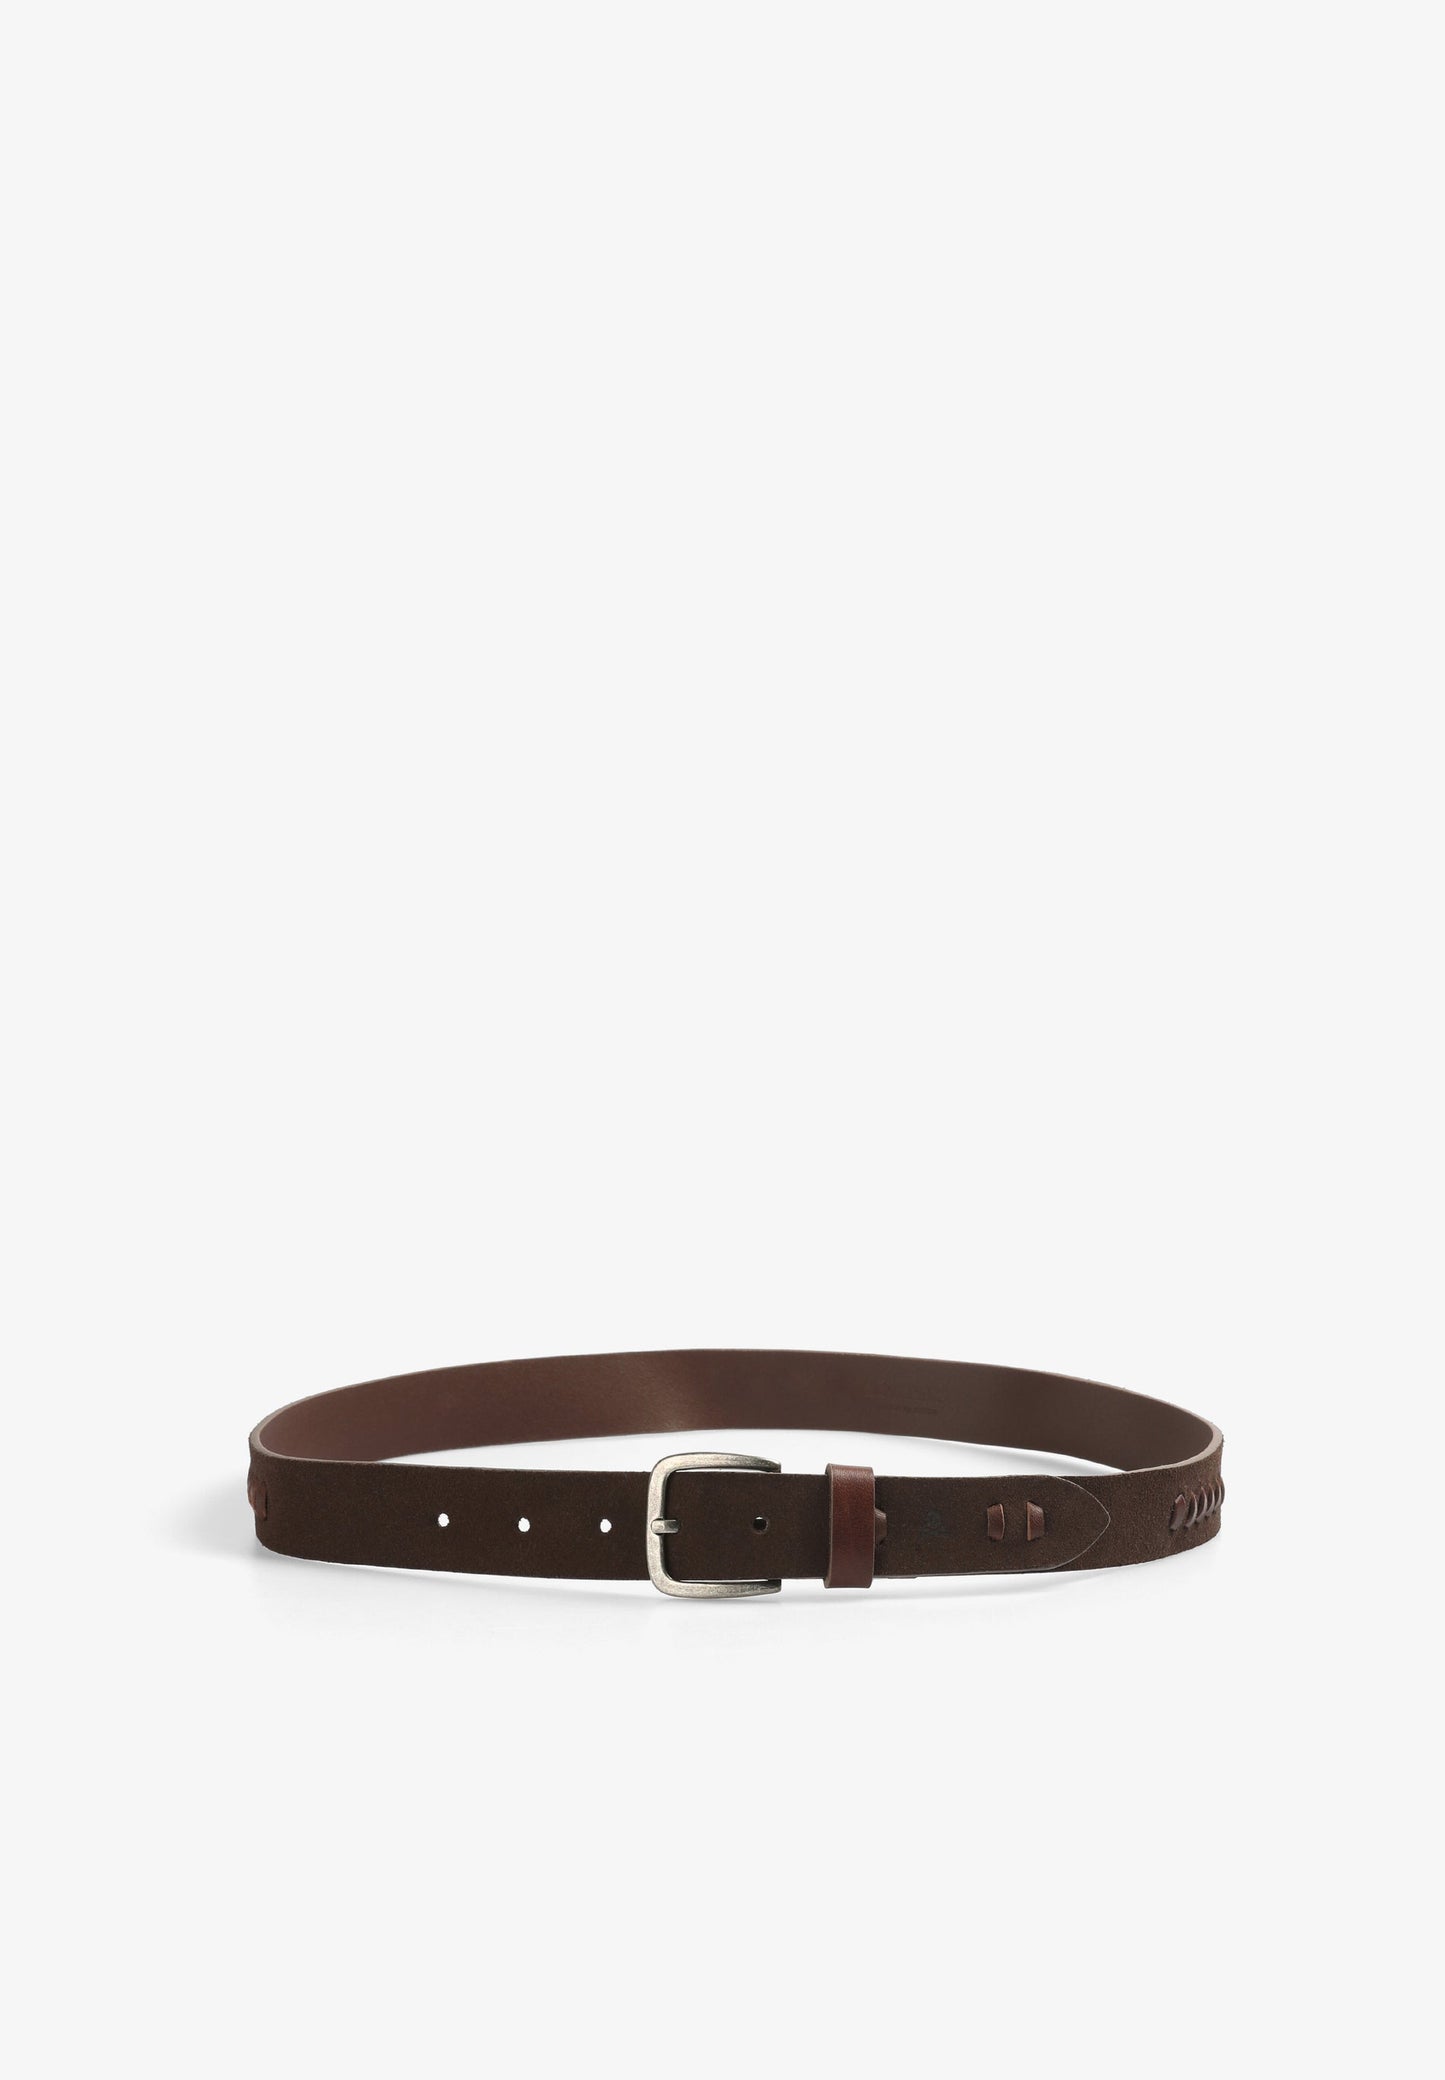 LEATHER BELT WITH DETAILS